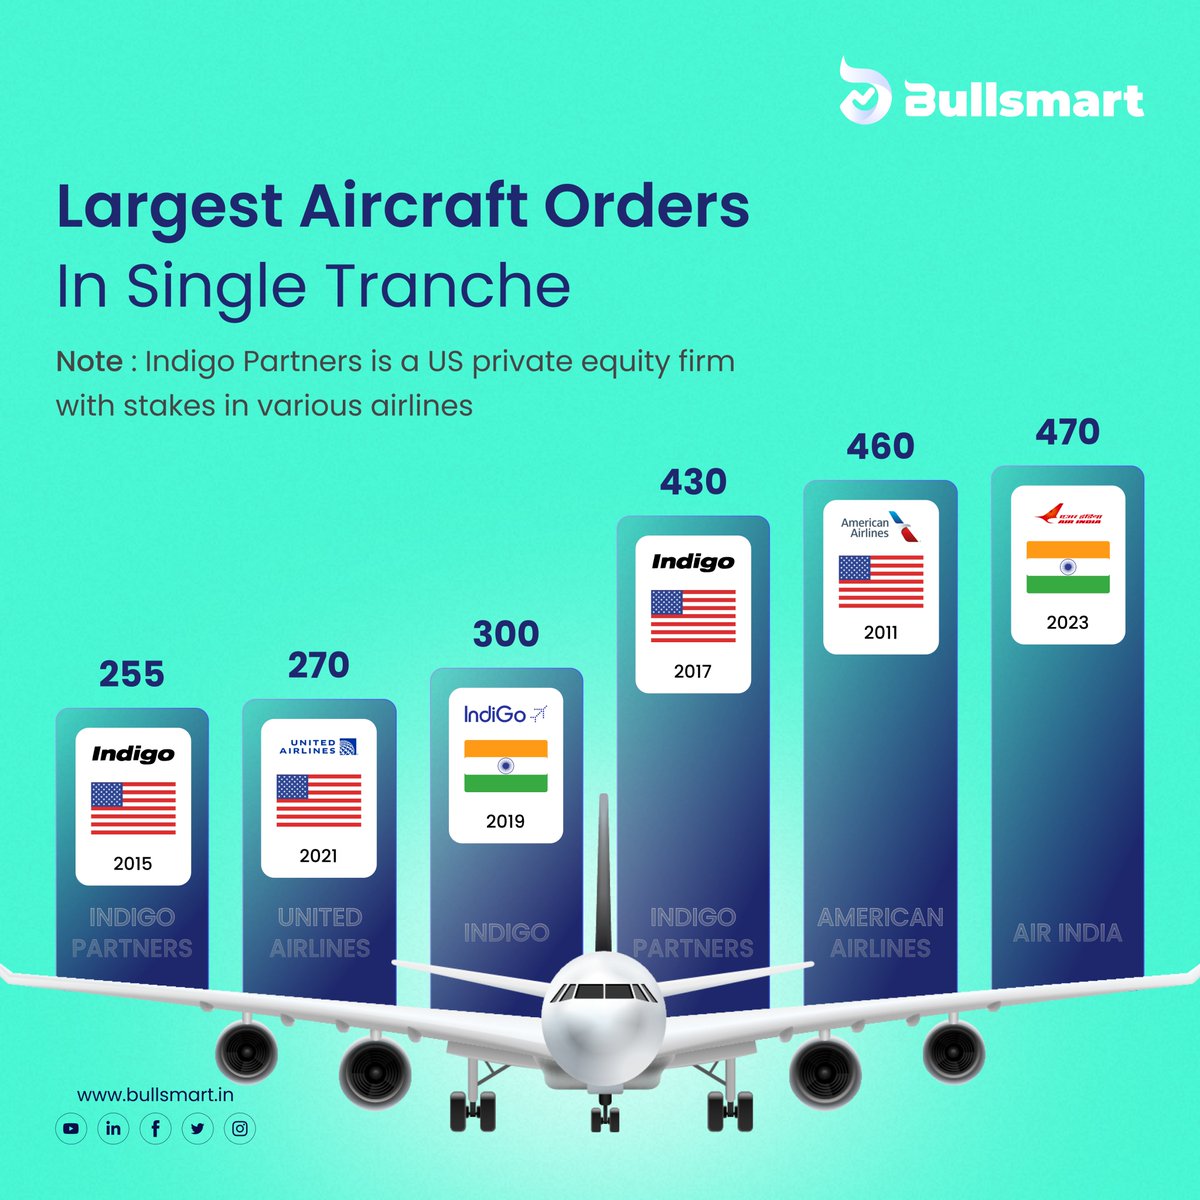 India soars to new heights as it secures the highest number of aircraft orders worldwide.

#india #bullsmart #stocks #stockmarket #invest #investment #airbus #aircraft #indigo #airindia #indigoairlines✈️ #indigopartners #trending #trendingnow